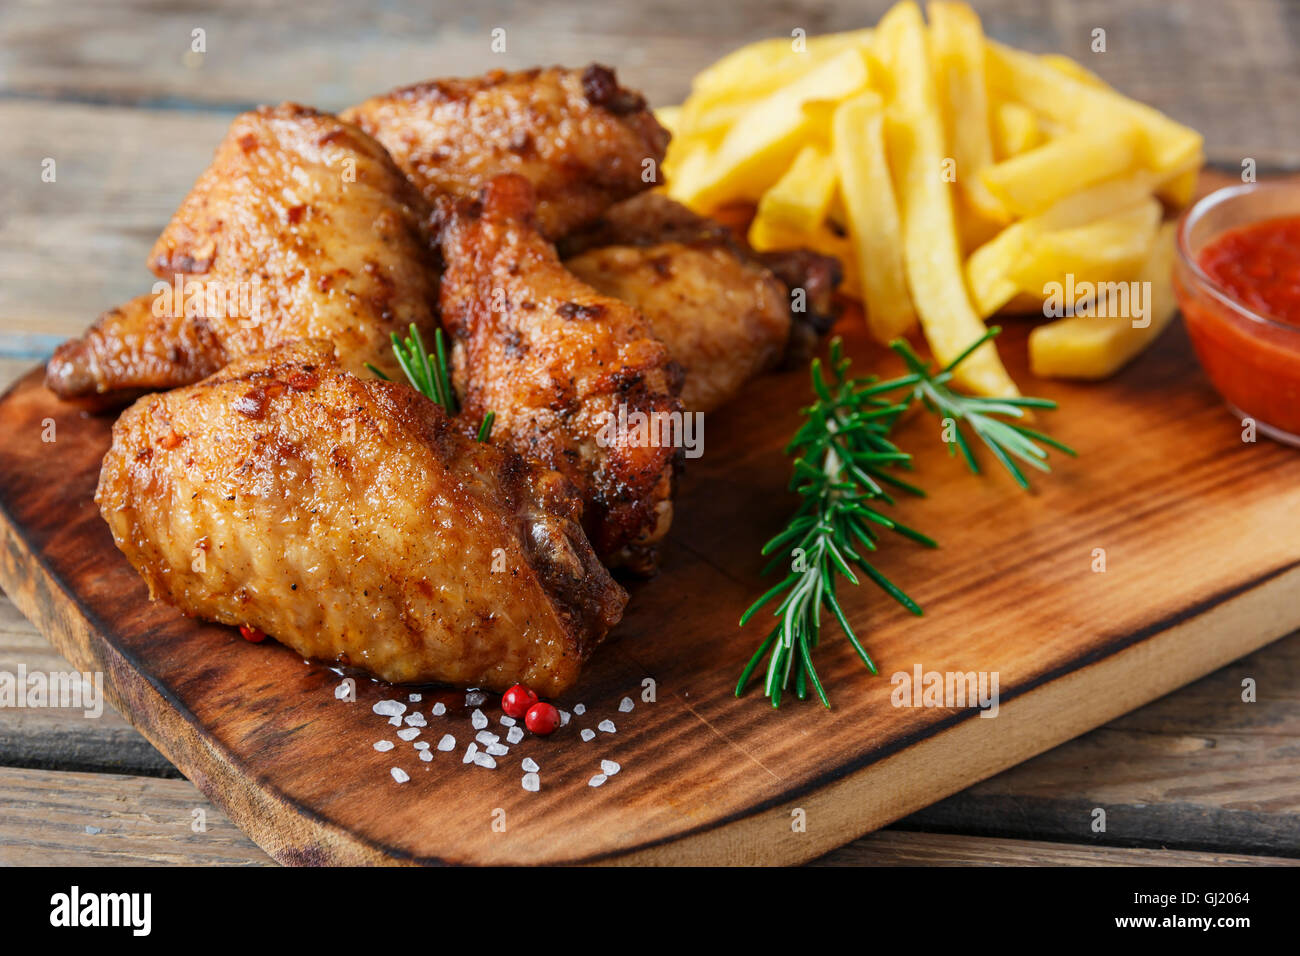 fried chicken wings french fries and sauce Stock Photo